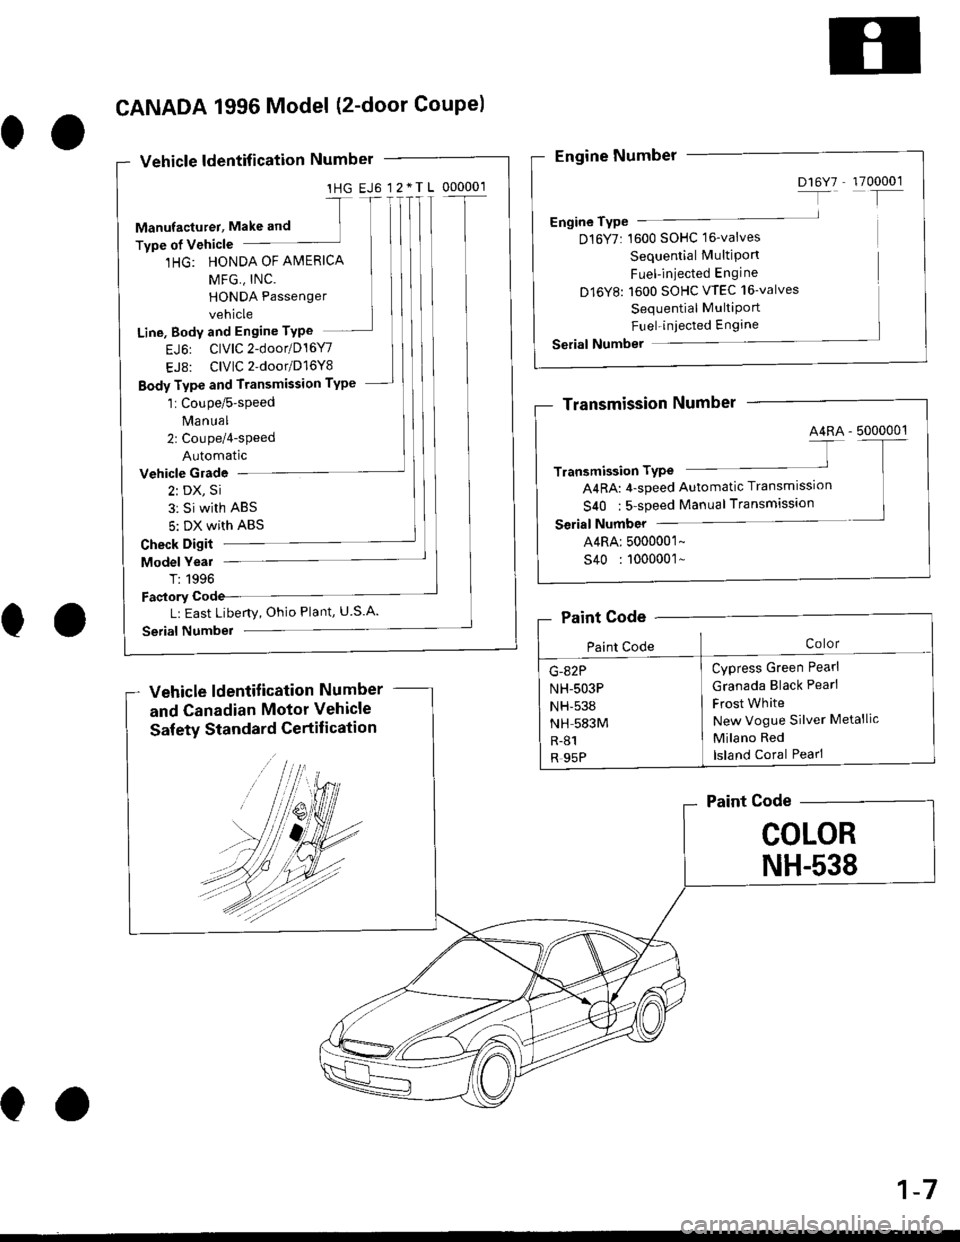 HONDA CIVIC 1997 6.G Workshop Manual 1HG EJ6 12.TL 000001
Line, Body and Engine TYPe
EJ6: ClVlC2-door/D16Y7
EJ8: ClVlC2door/D16Y8
Body Type and Transmission TYPe
Vehicle Glade
2: DX, Si
3: Si with ABS
5: DX with ABS
Check Digit
Model Ye